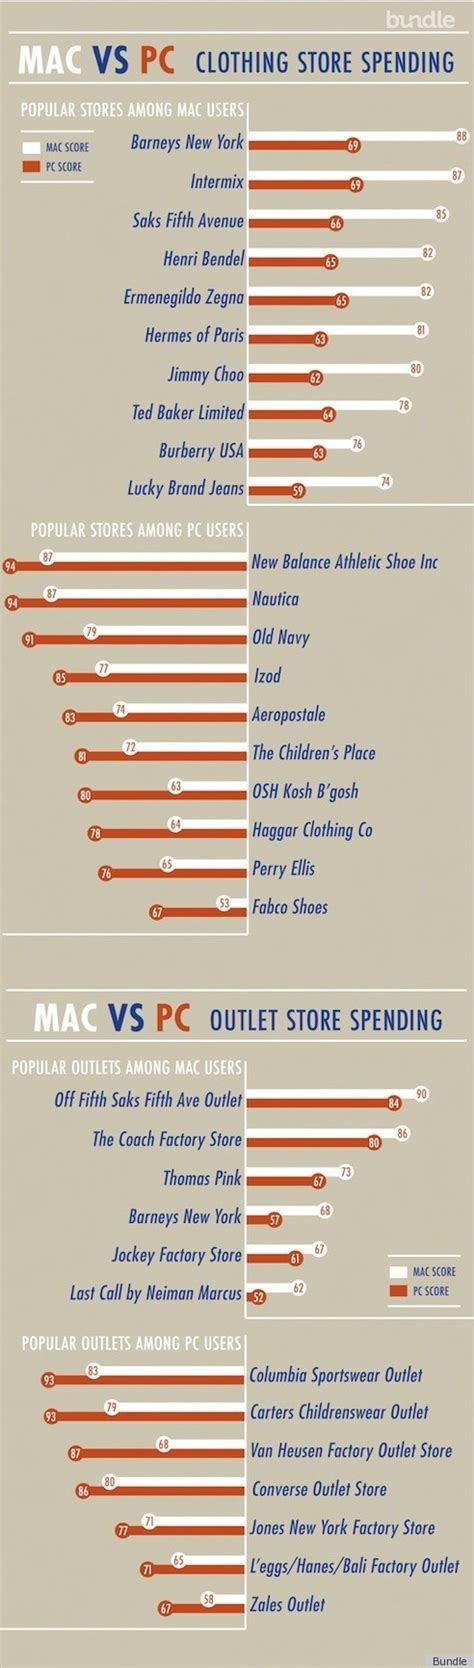 mac users   fashionable  pc users study finds infographic